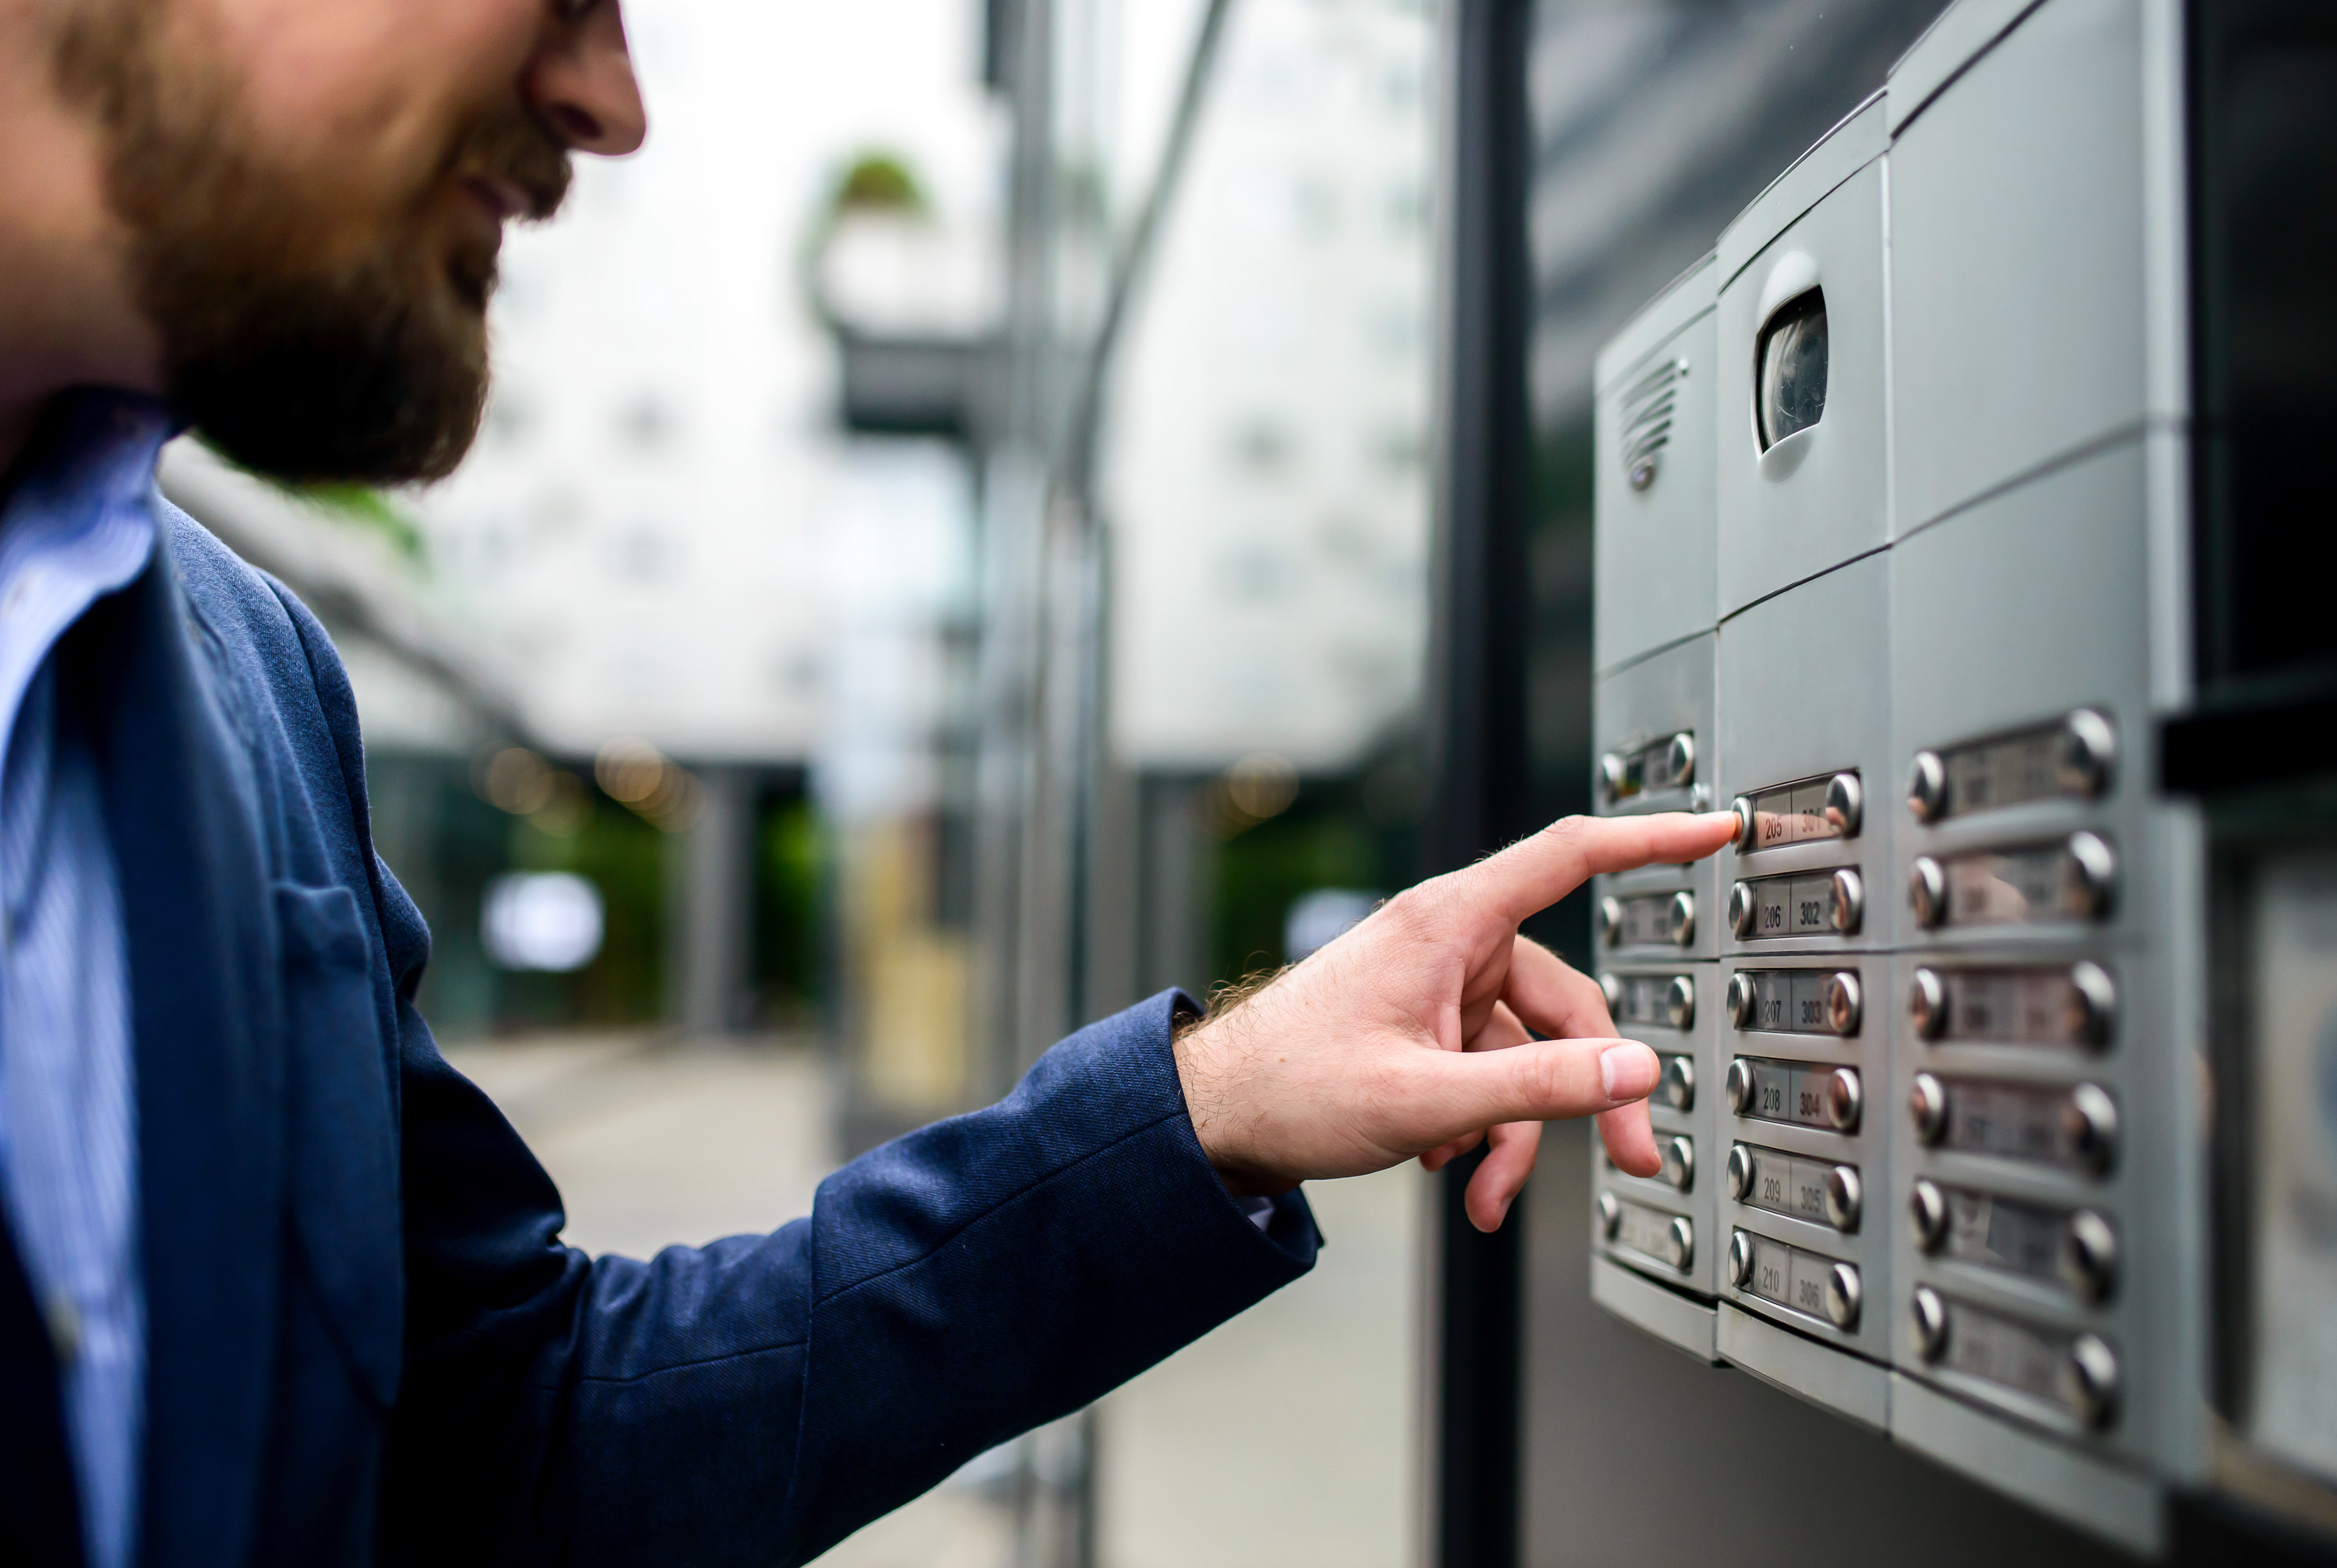 A man pushing buttons to access an apartment